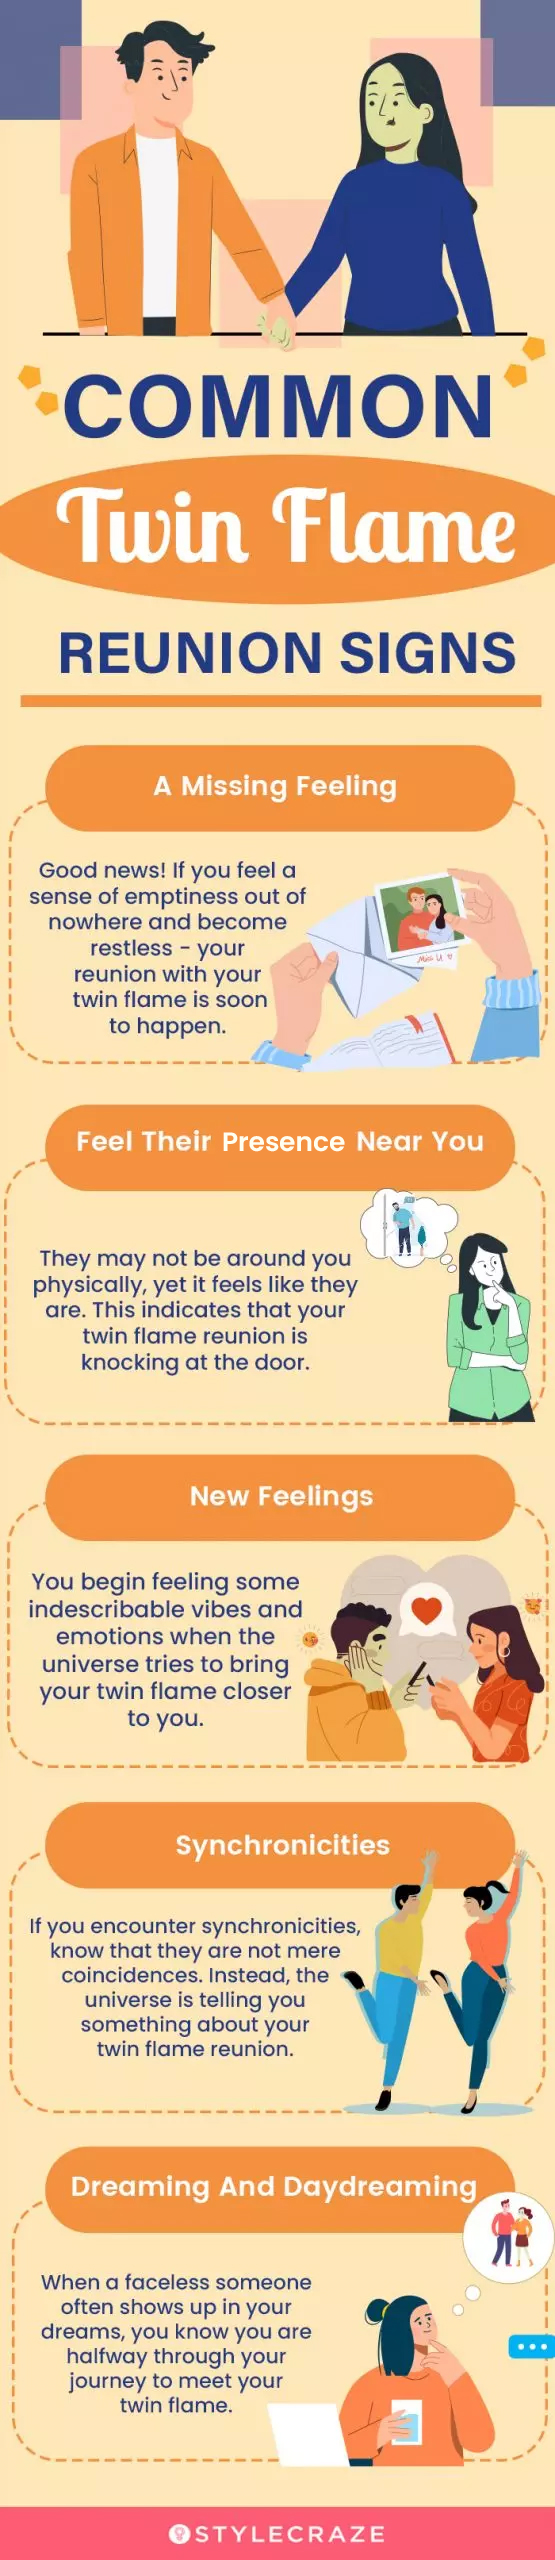 common twin flame reunion signs (infographic)